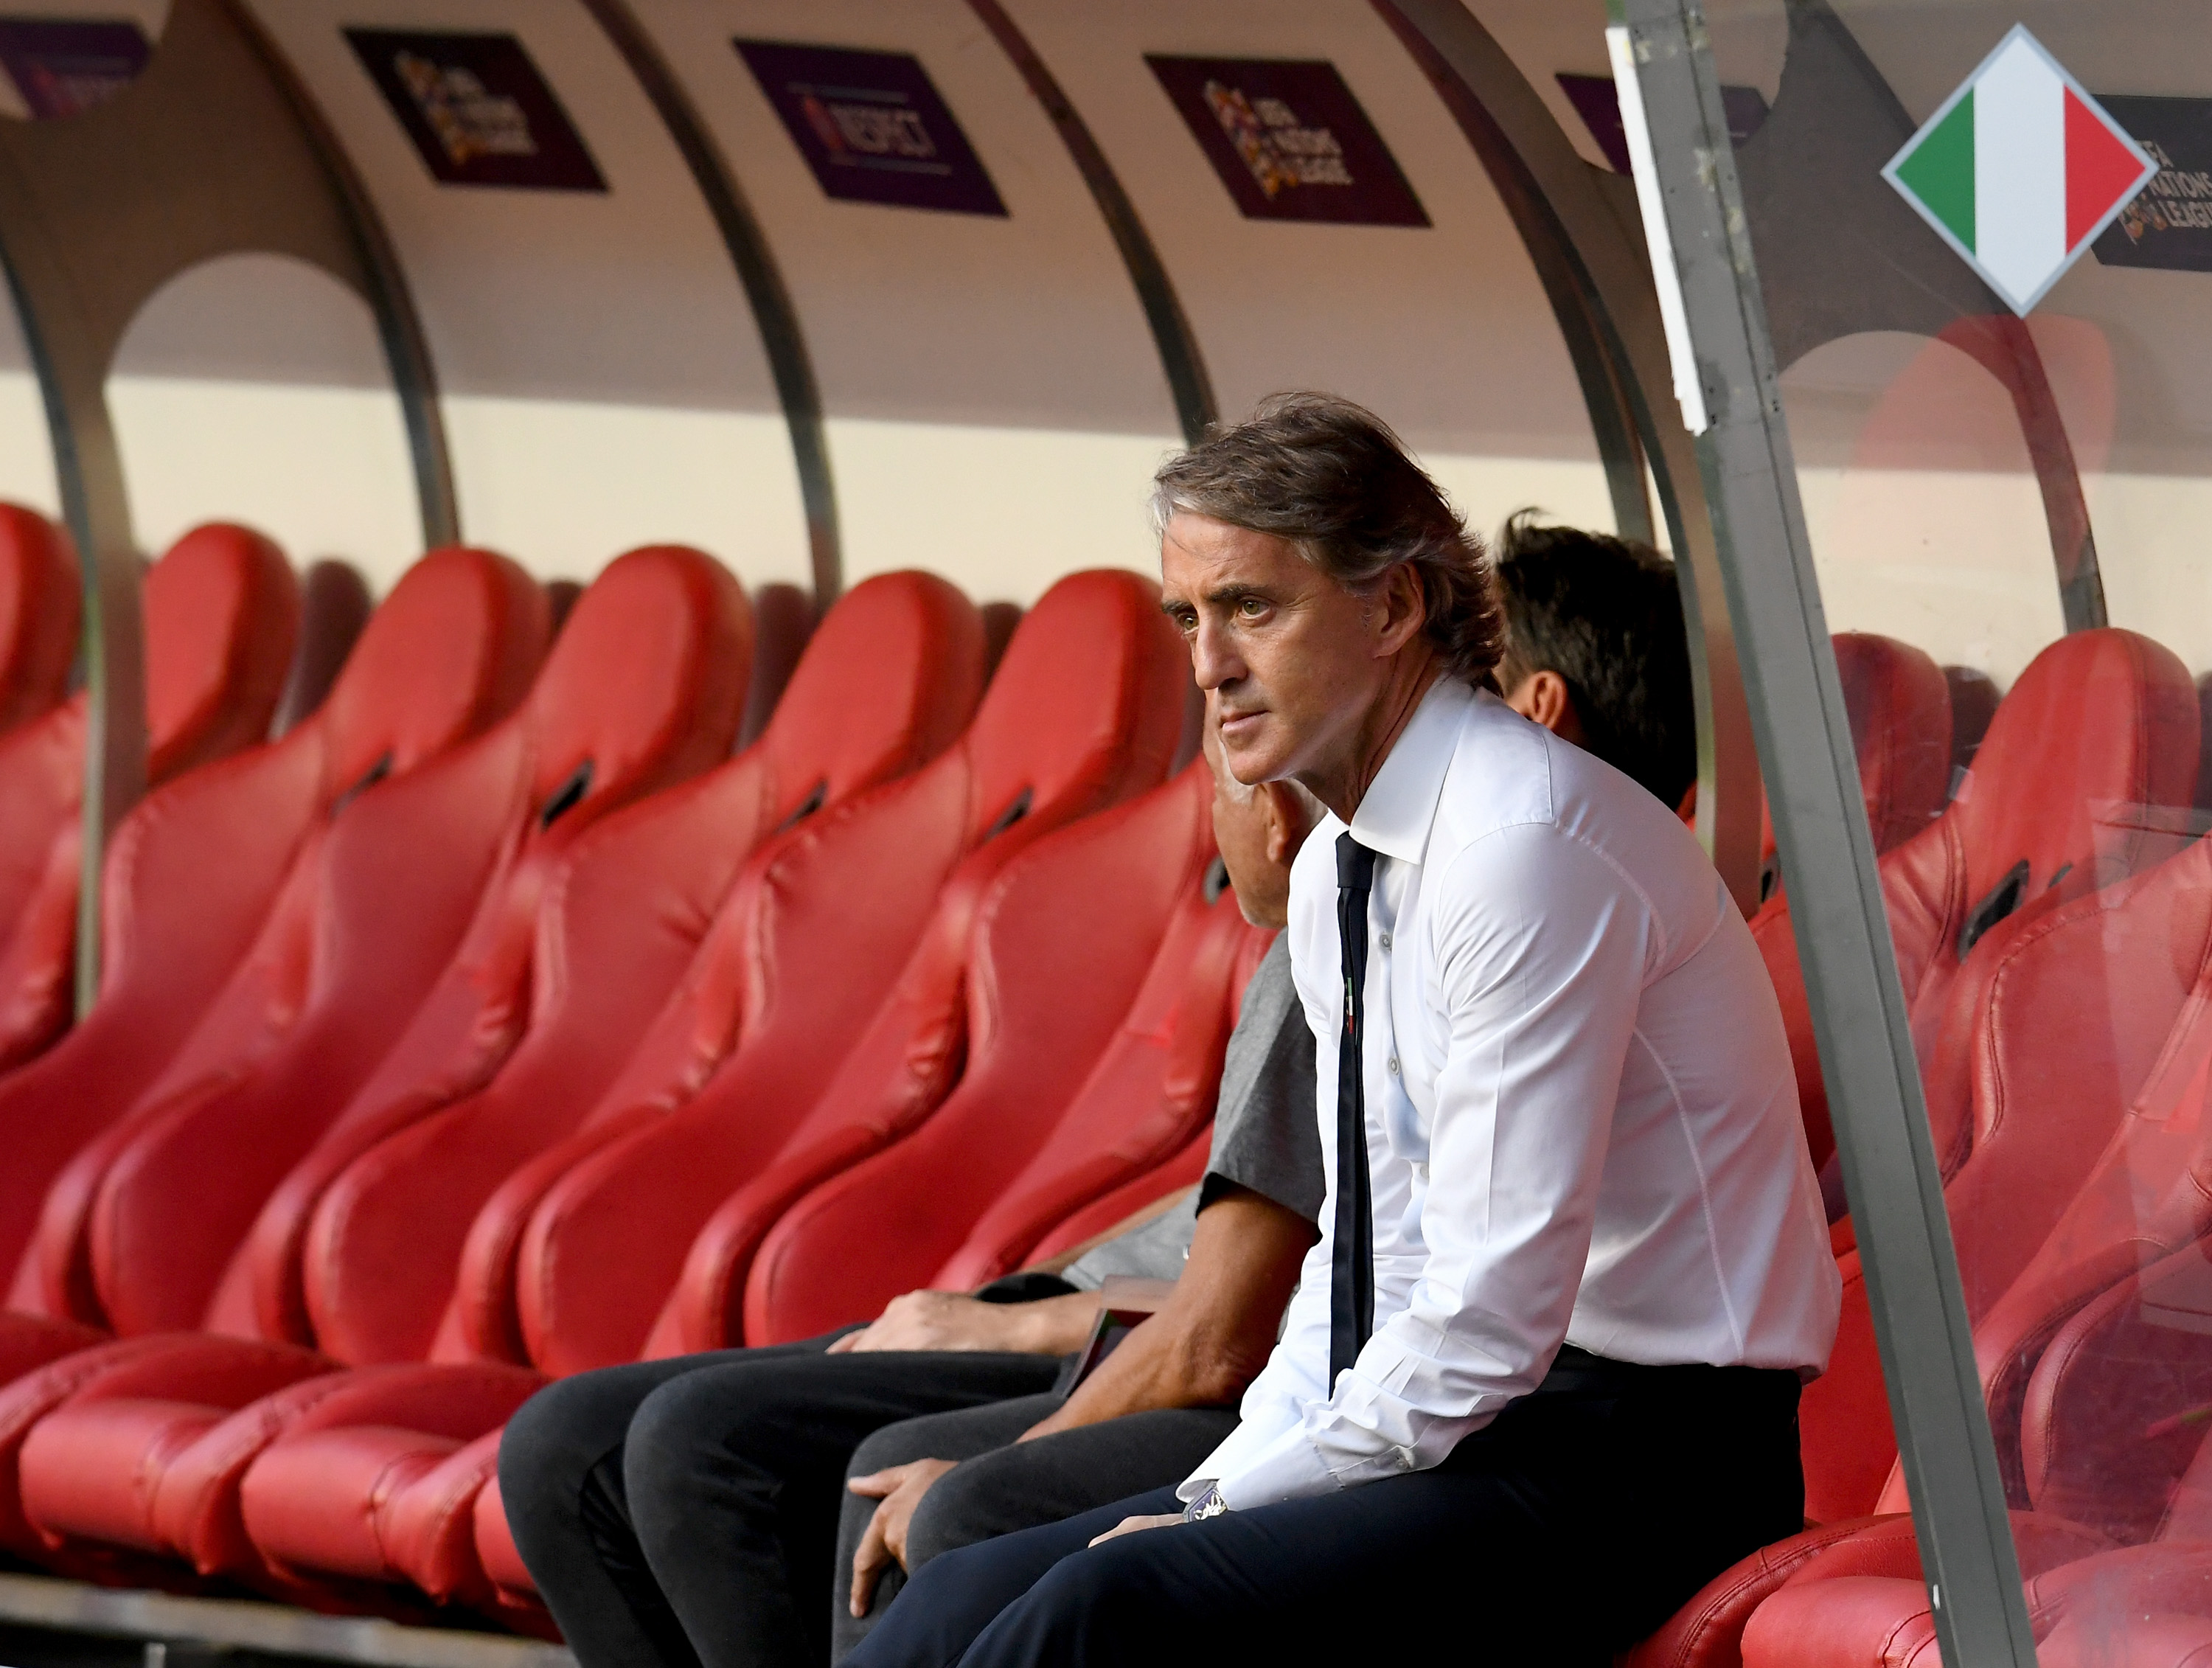 LISBON, PORTUGAL - SEPTEMBER 10:  Head coach Italy Roberto Mancini look on before the UEFA Nations League A group three match between Portugal and Italy at  on September 10, 2018 in Lisbon, Portugal.  (Photo by Claudio Villa/Getty Images)